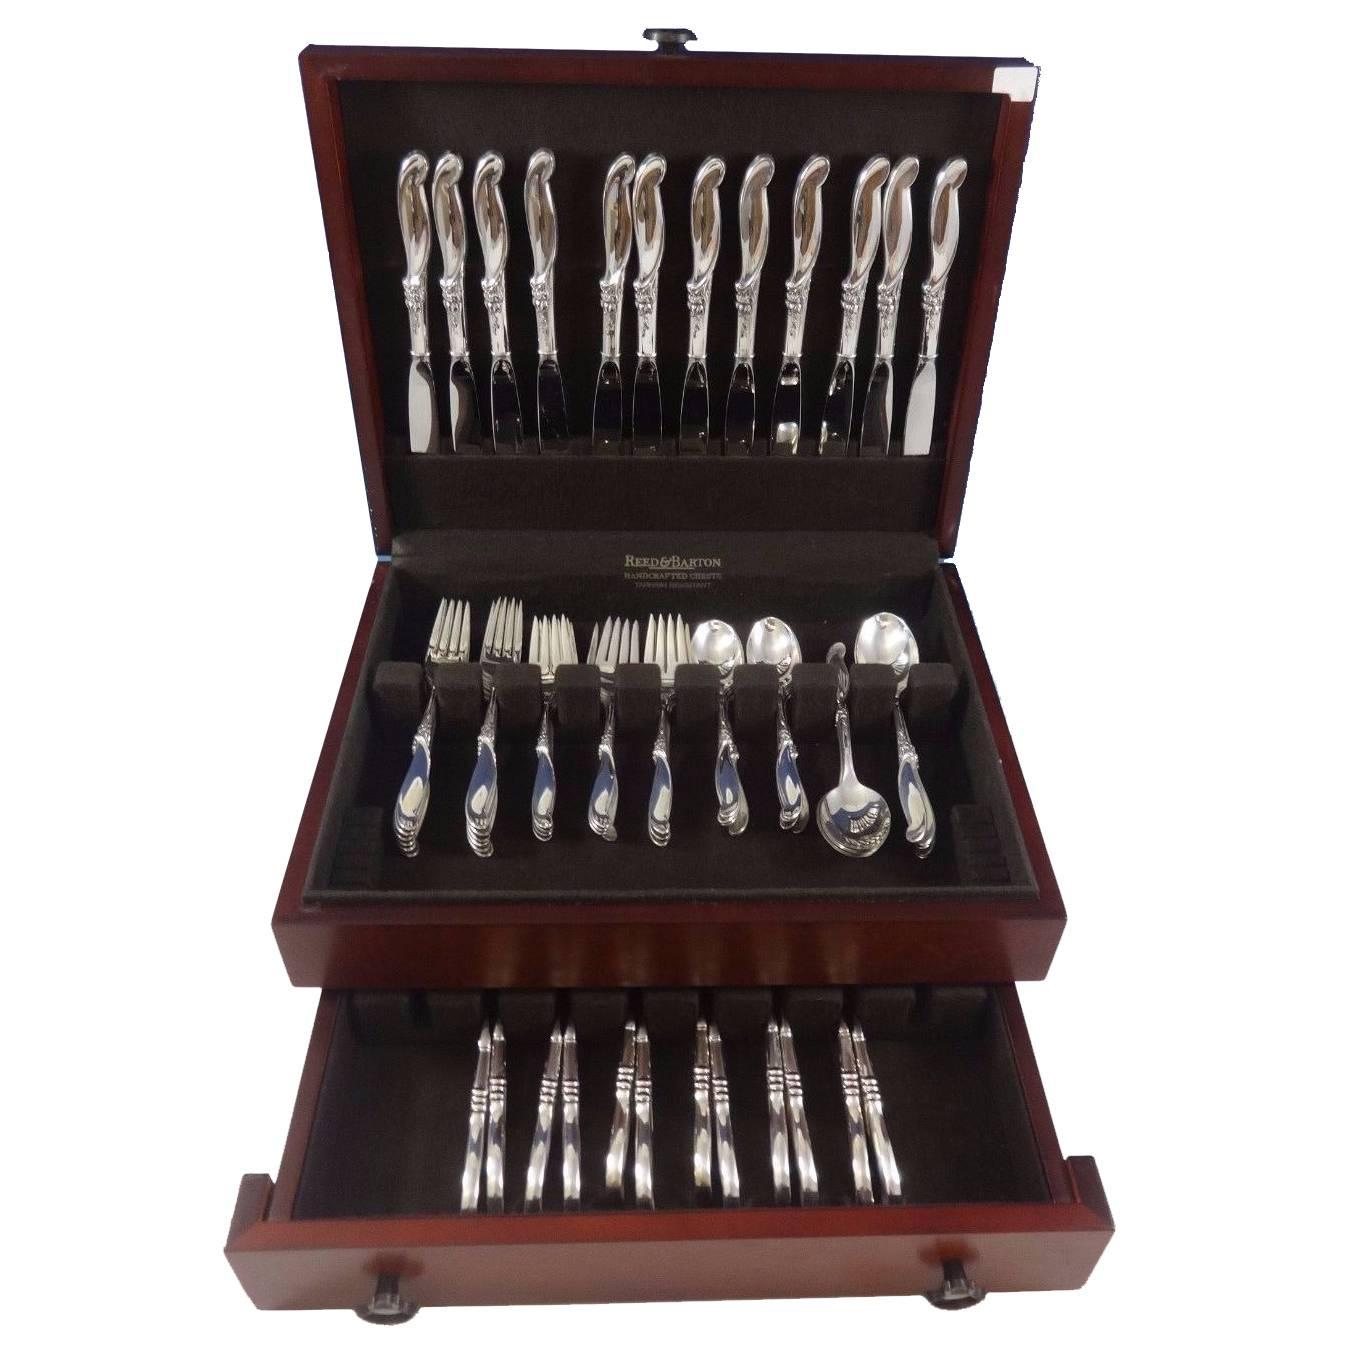 Stunning silver melody by International sterling silver flatware set of 72 pieces. This set includes:

12 knives, 9 1/4